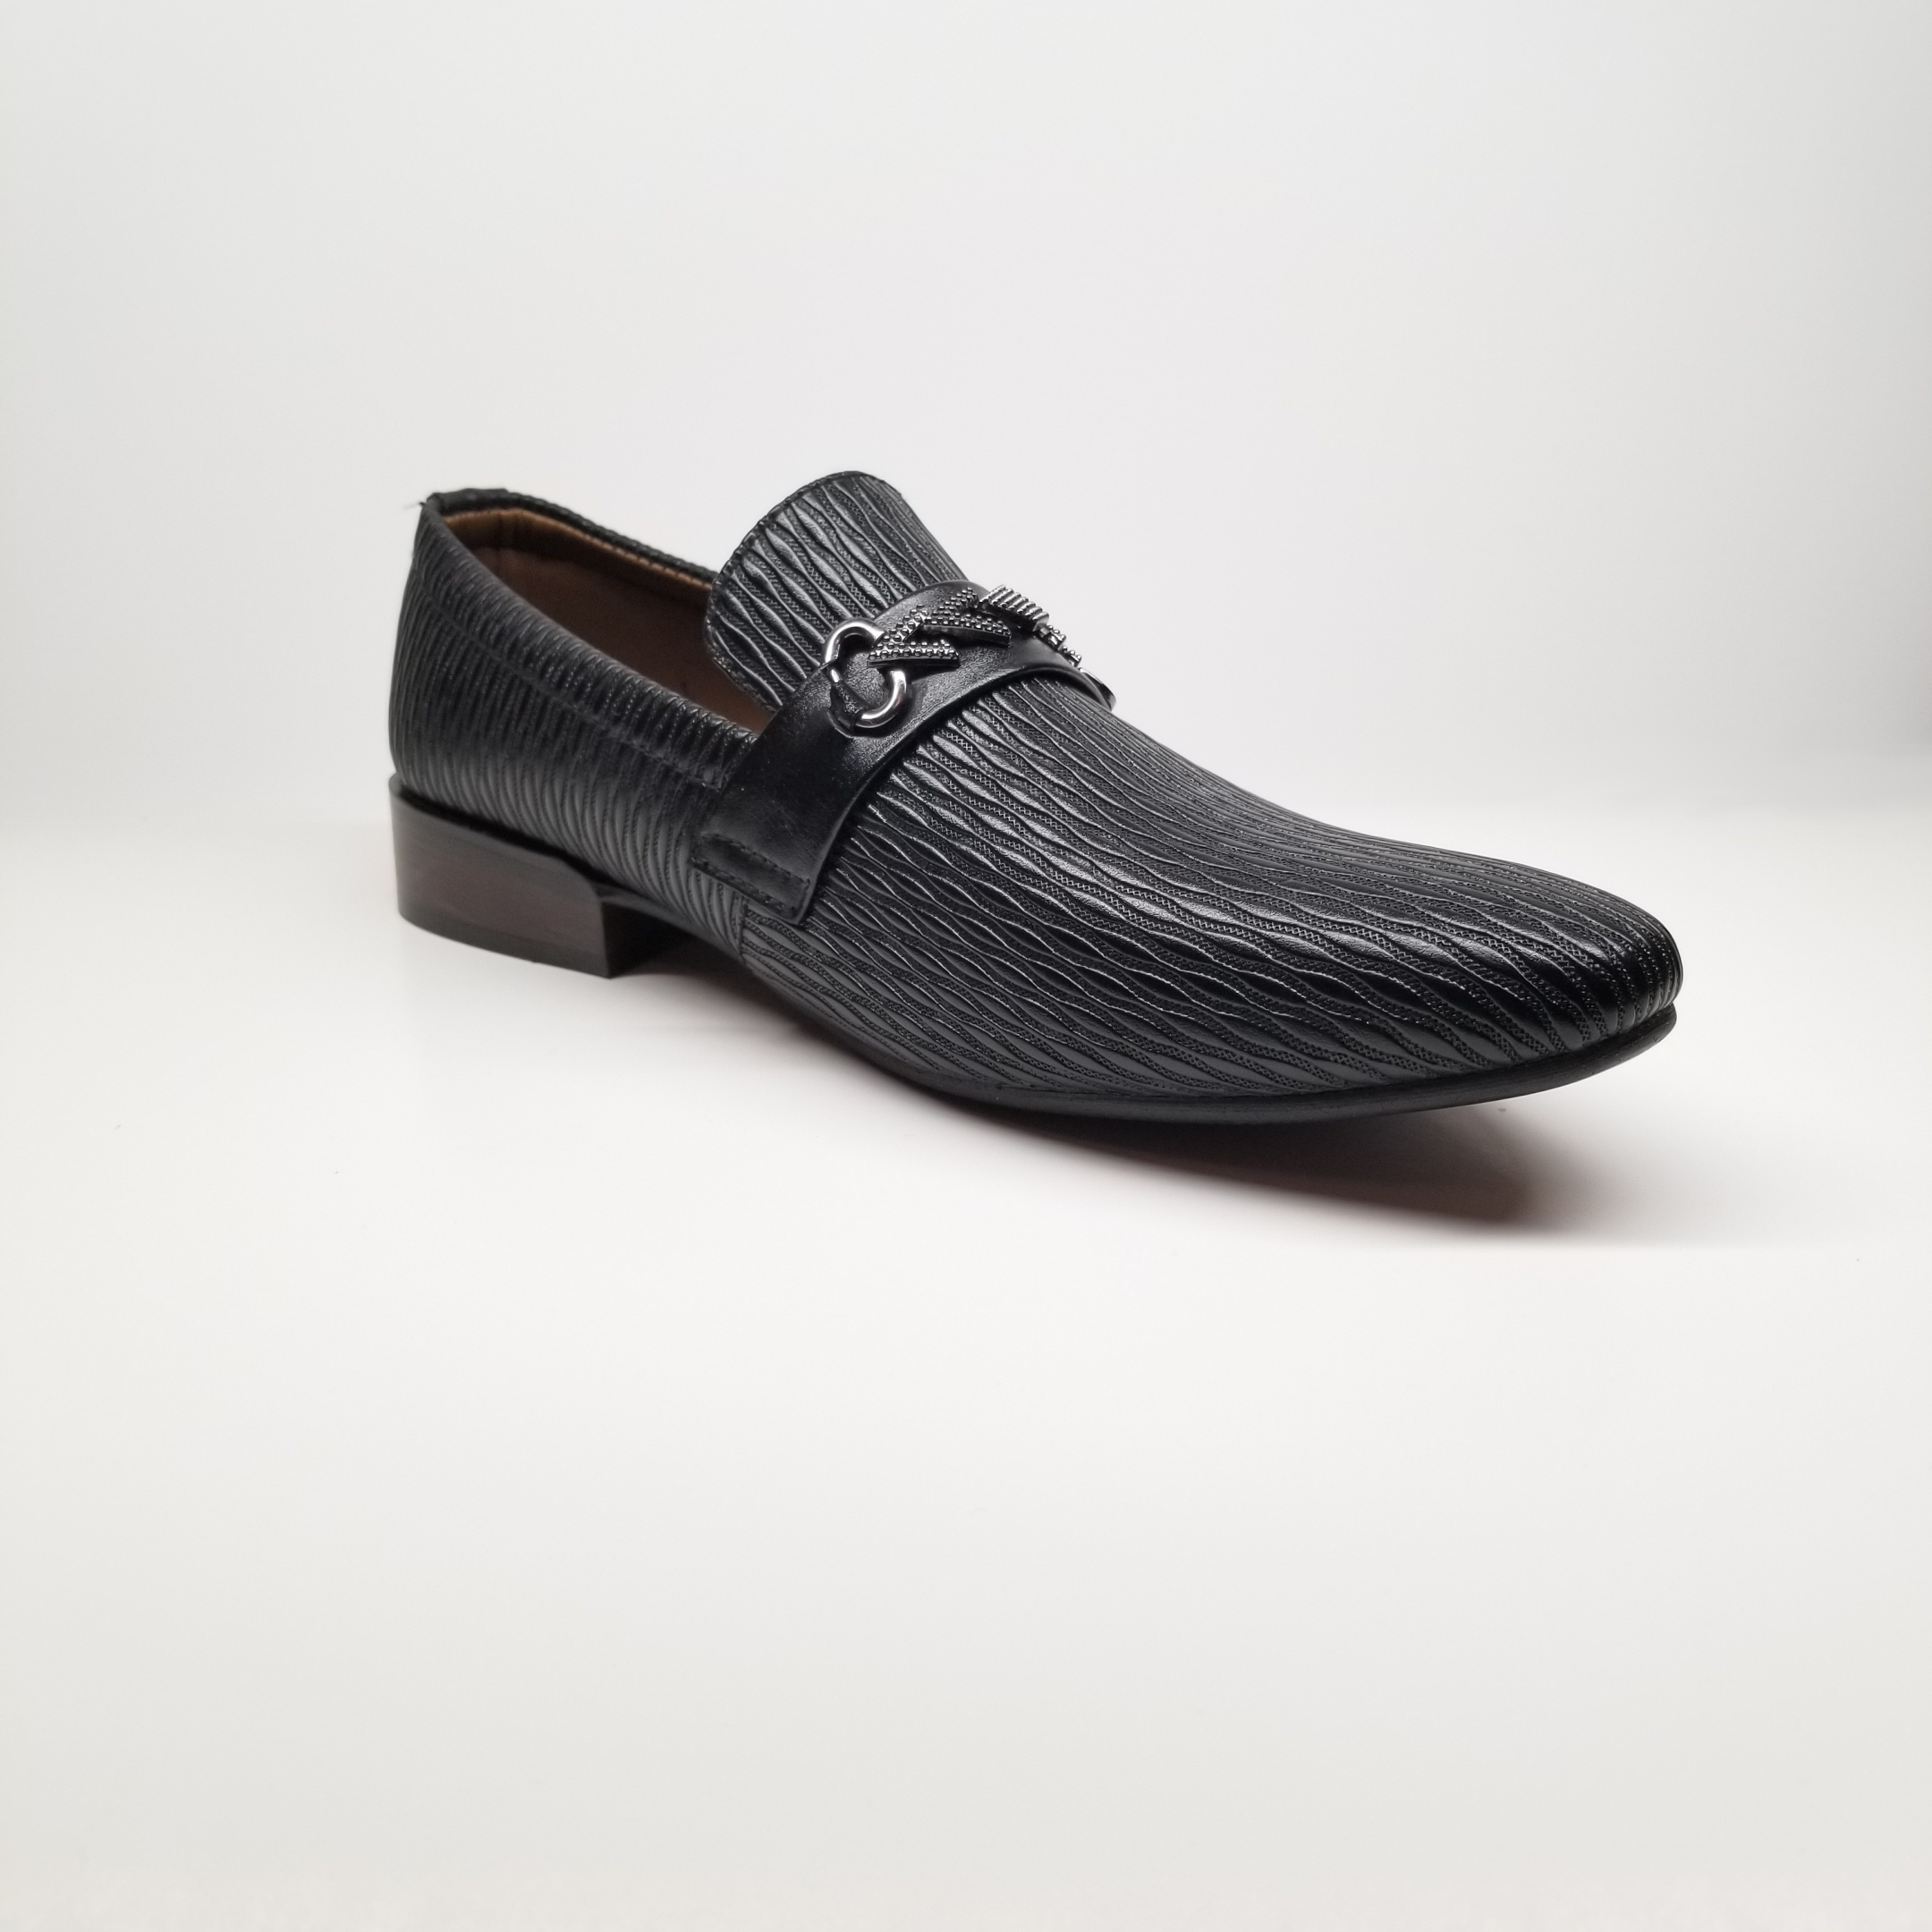 Conquer dress shoes by Walkies at NMFootwear.com